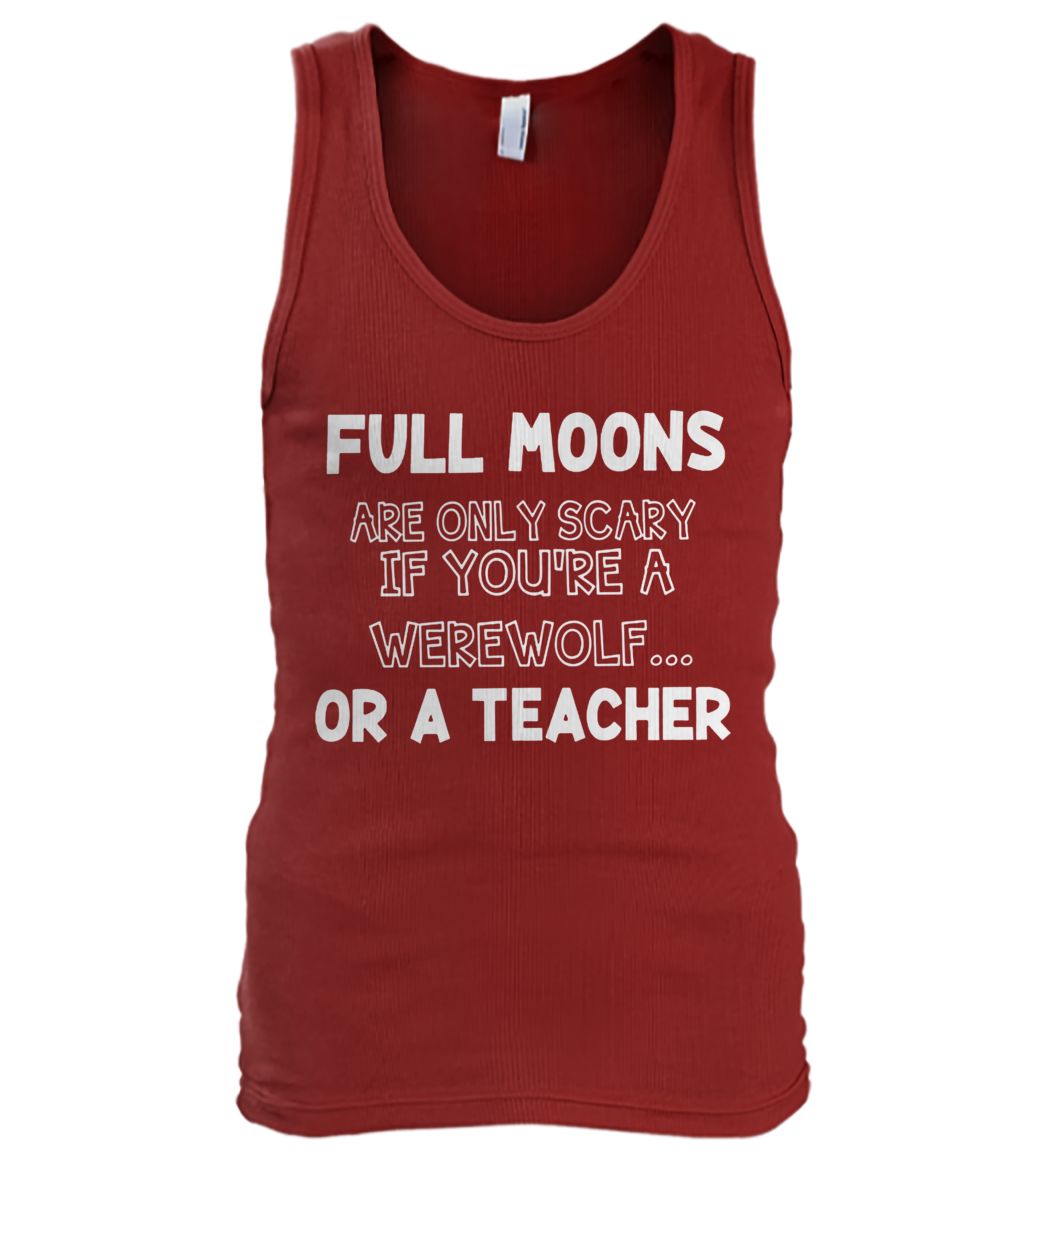 Full moons are only scary if you're a werewolf or a teacher men's tank top